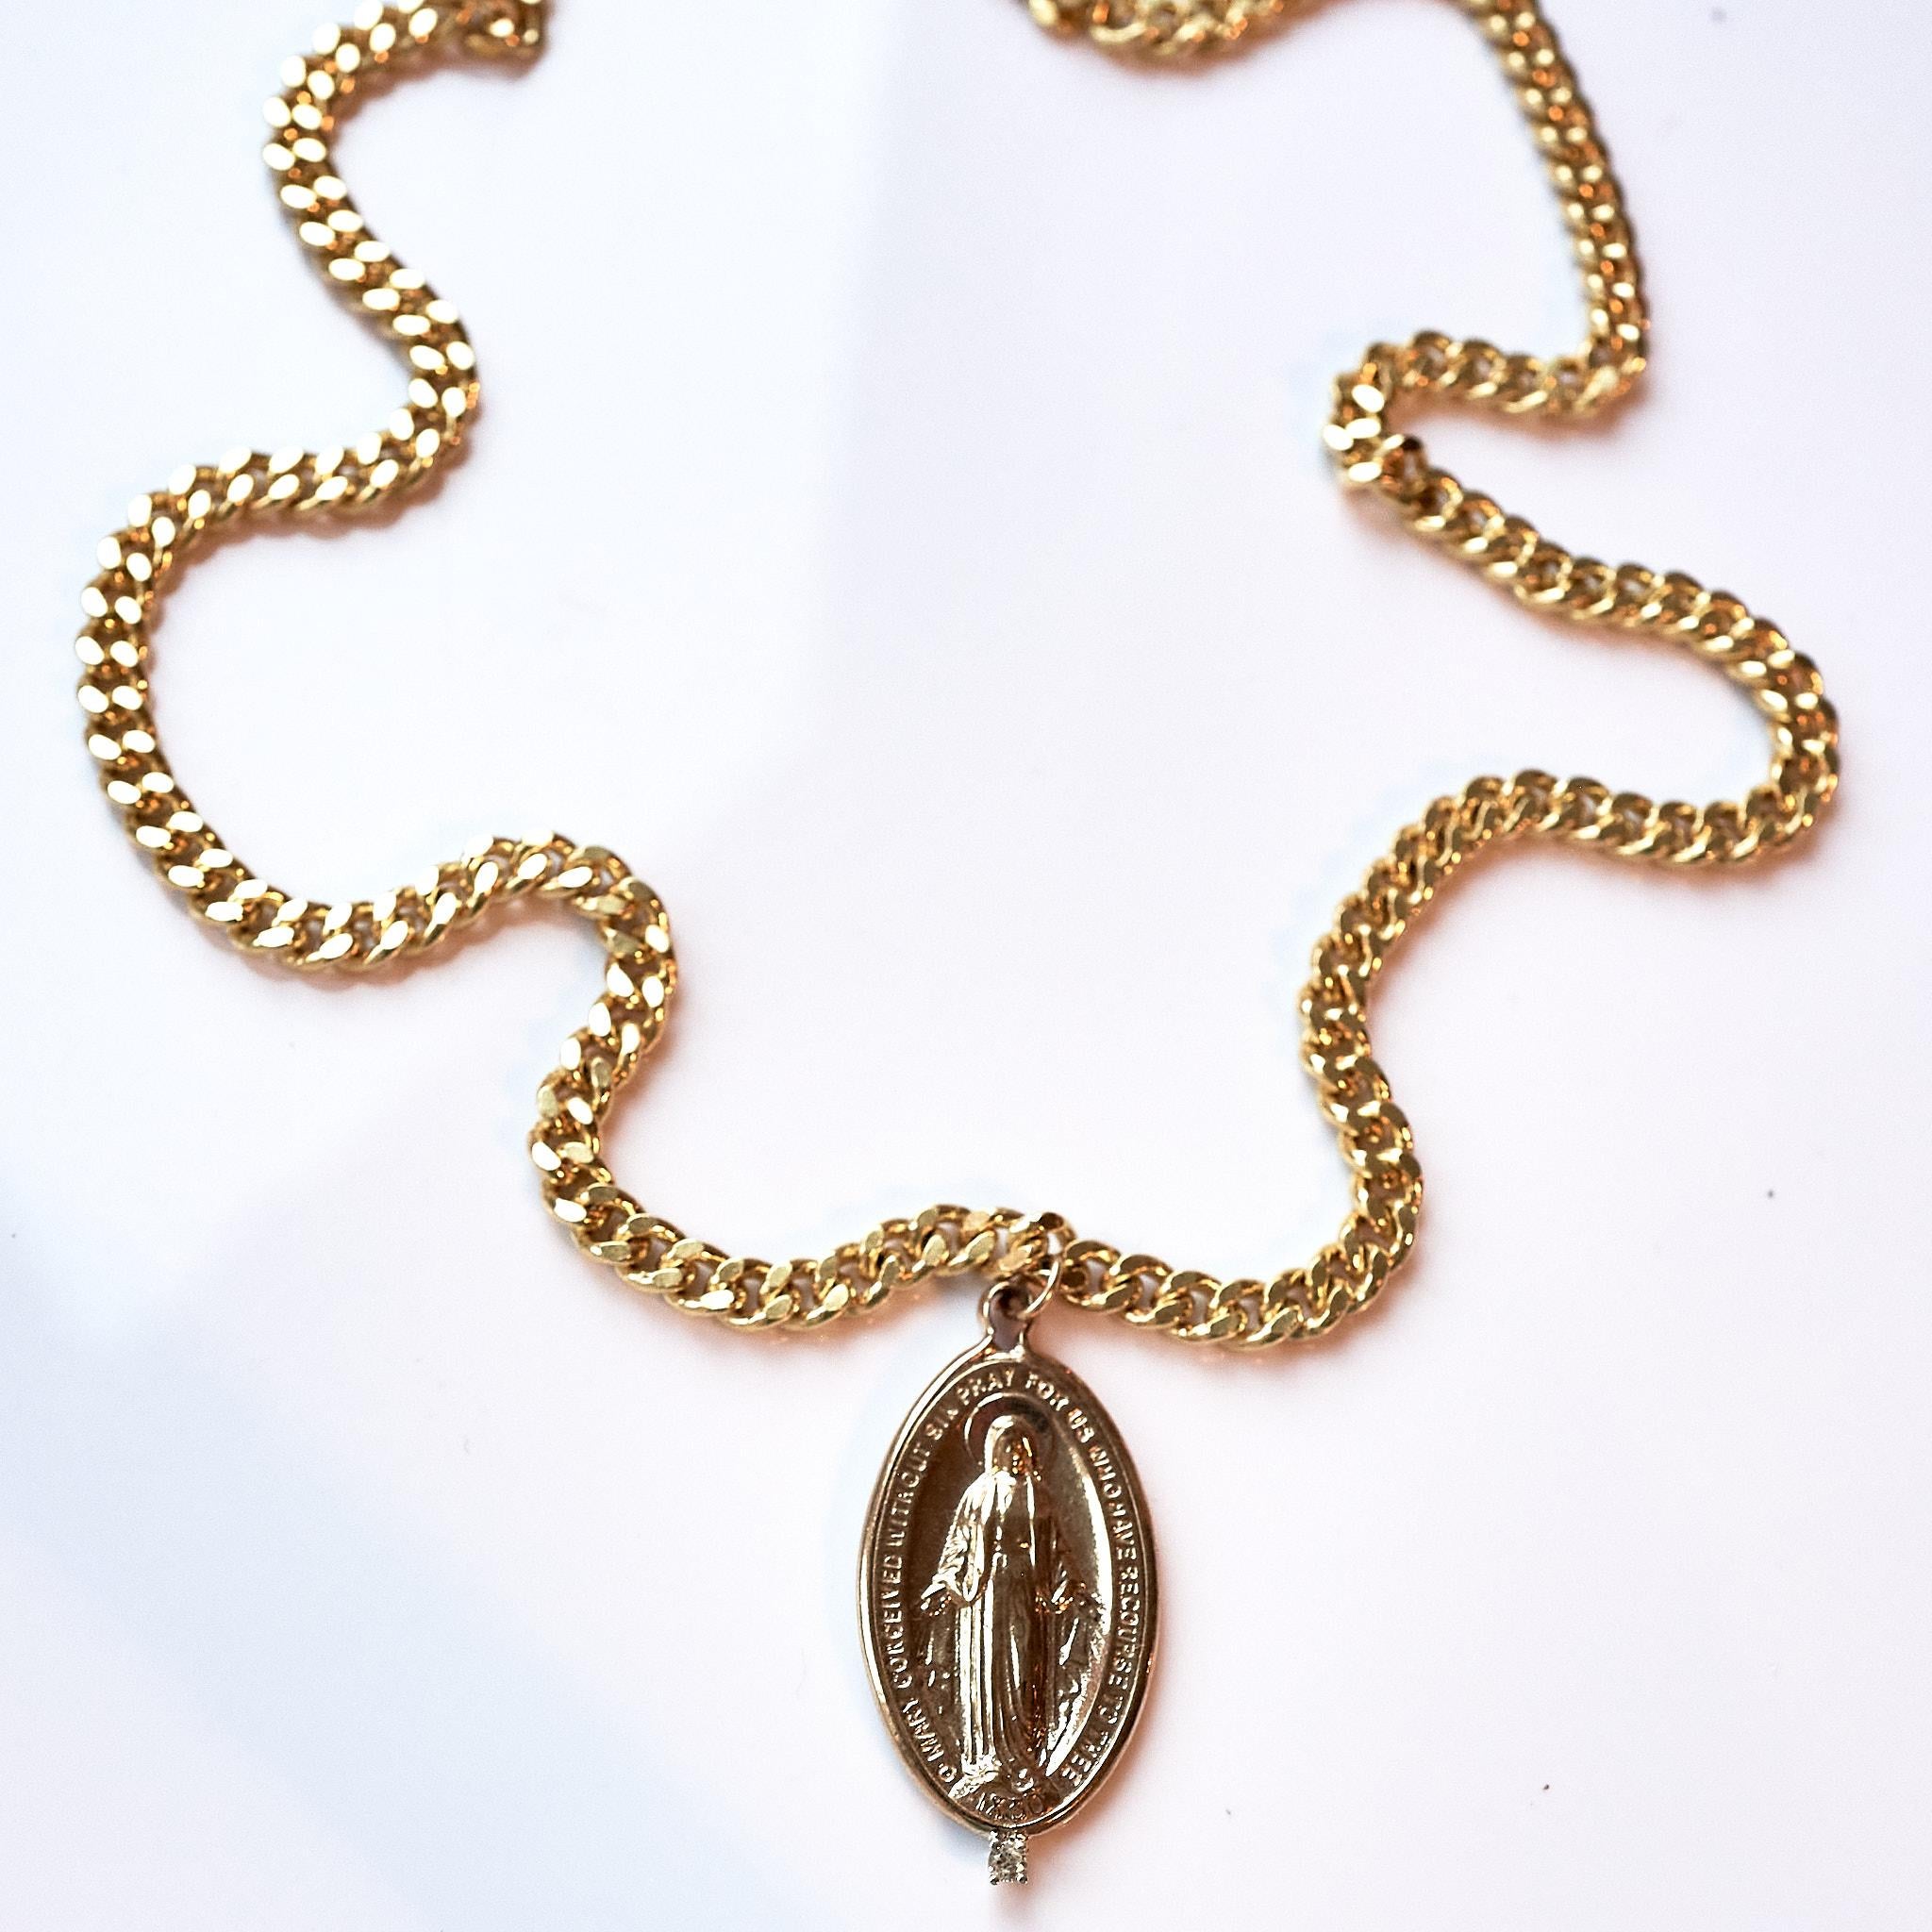 White Diamond Medal Virgin Mary Oval Medal Chain Necklace J Dauphin For Sale 3